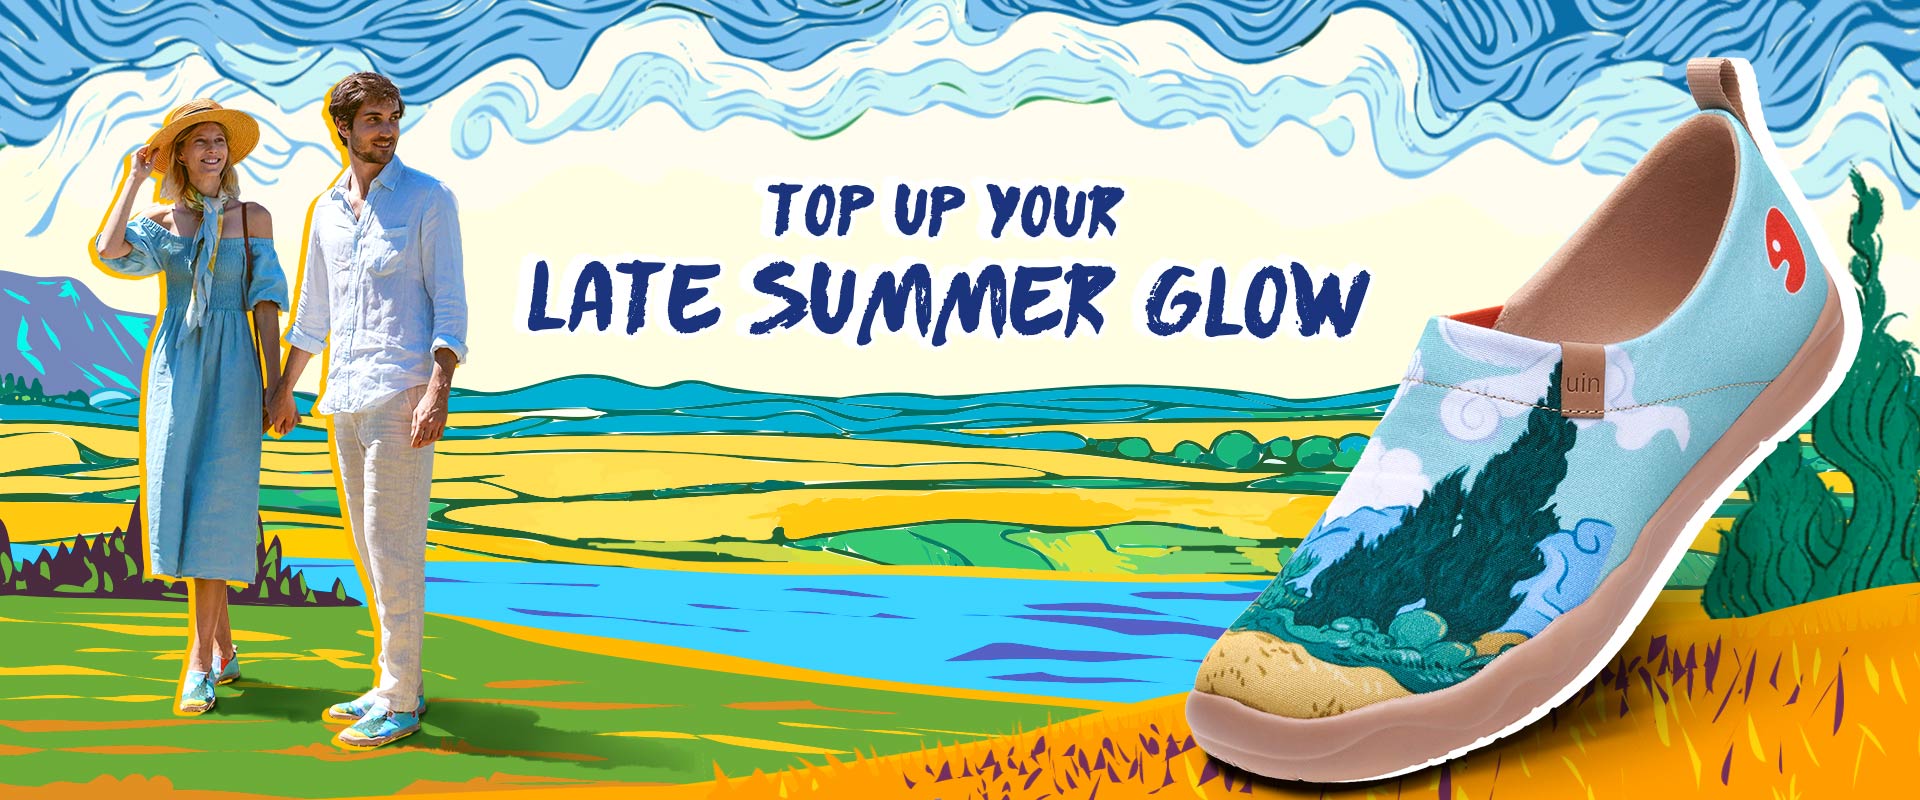 Top up Your Late Summer Glow